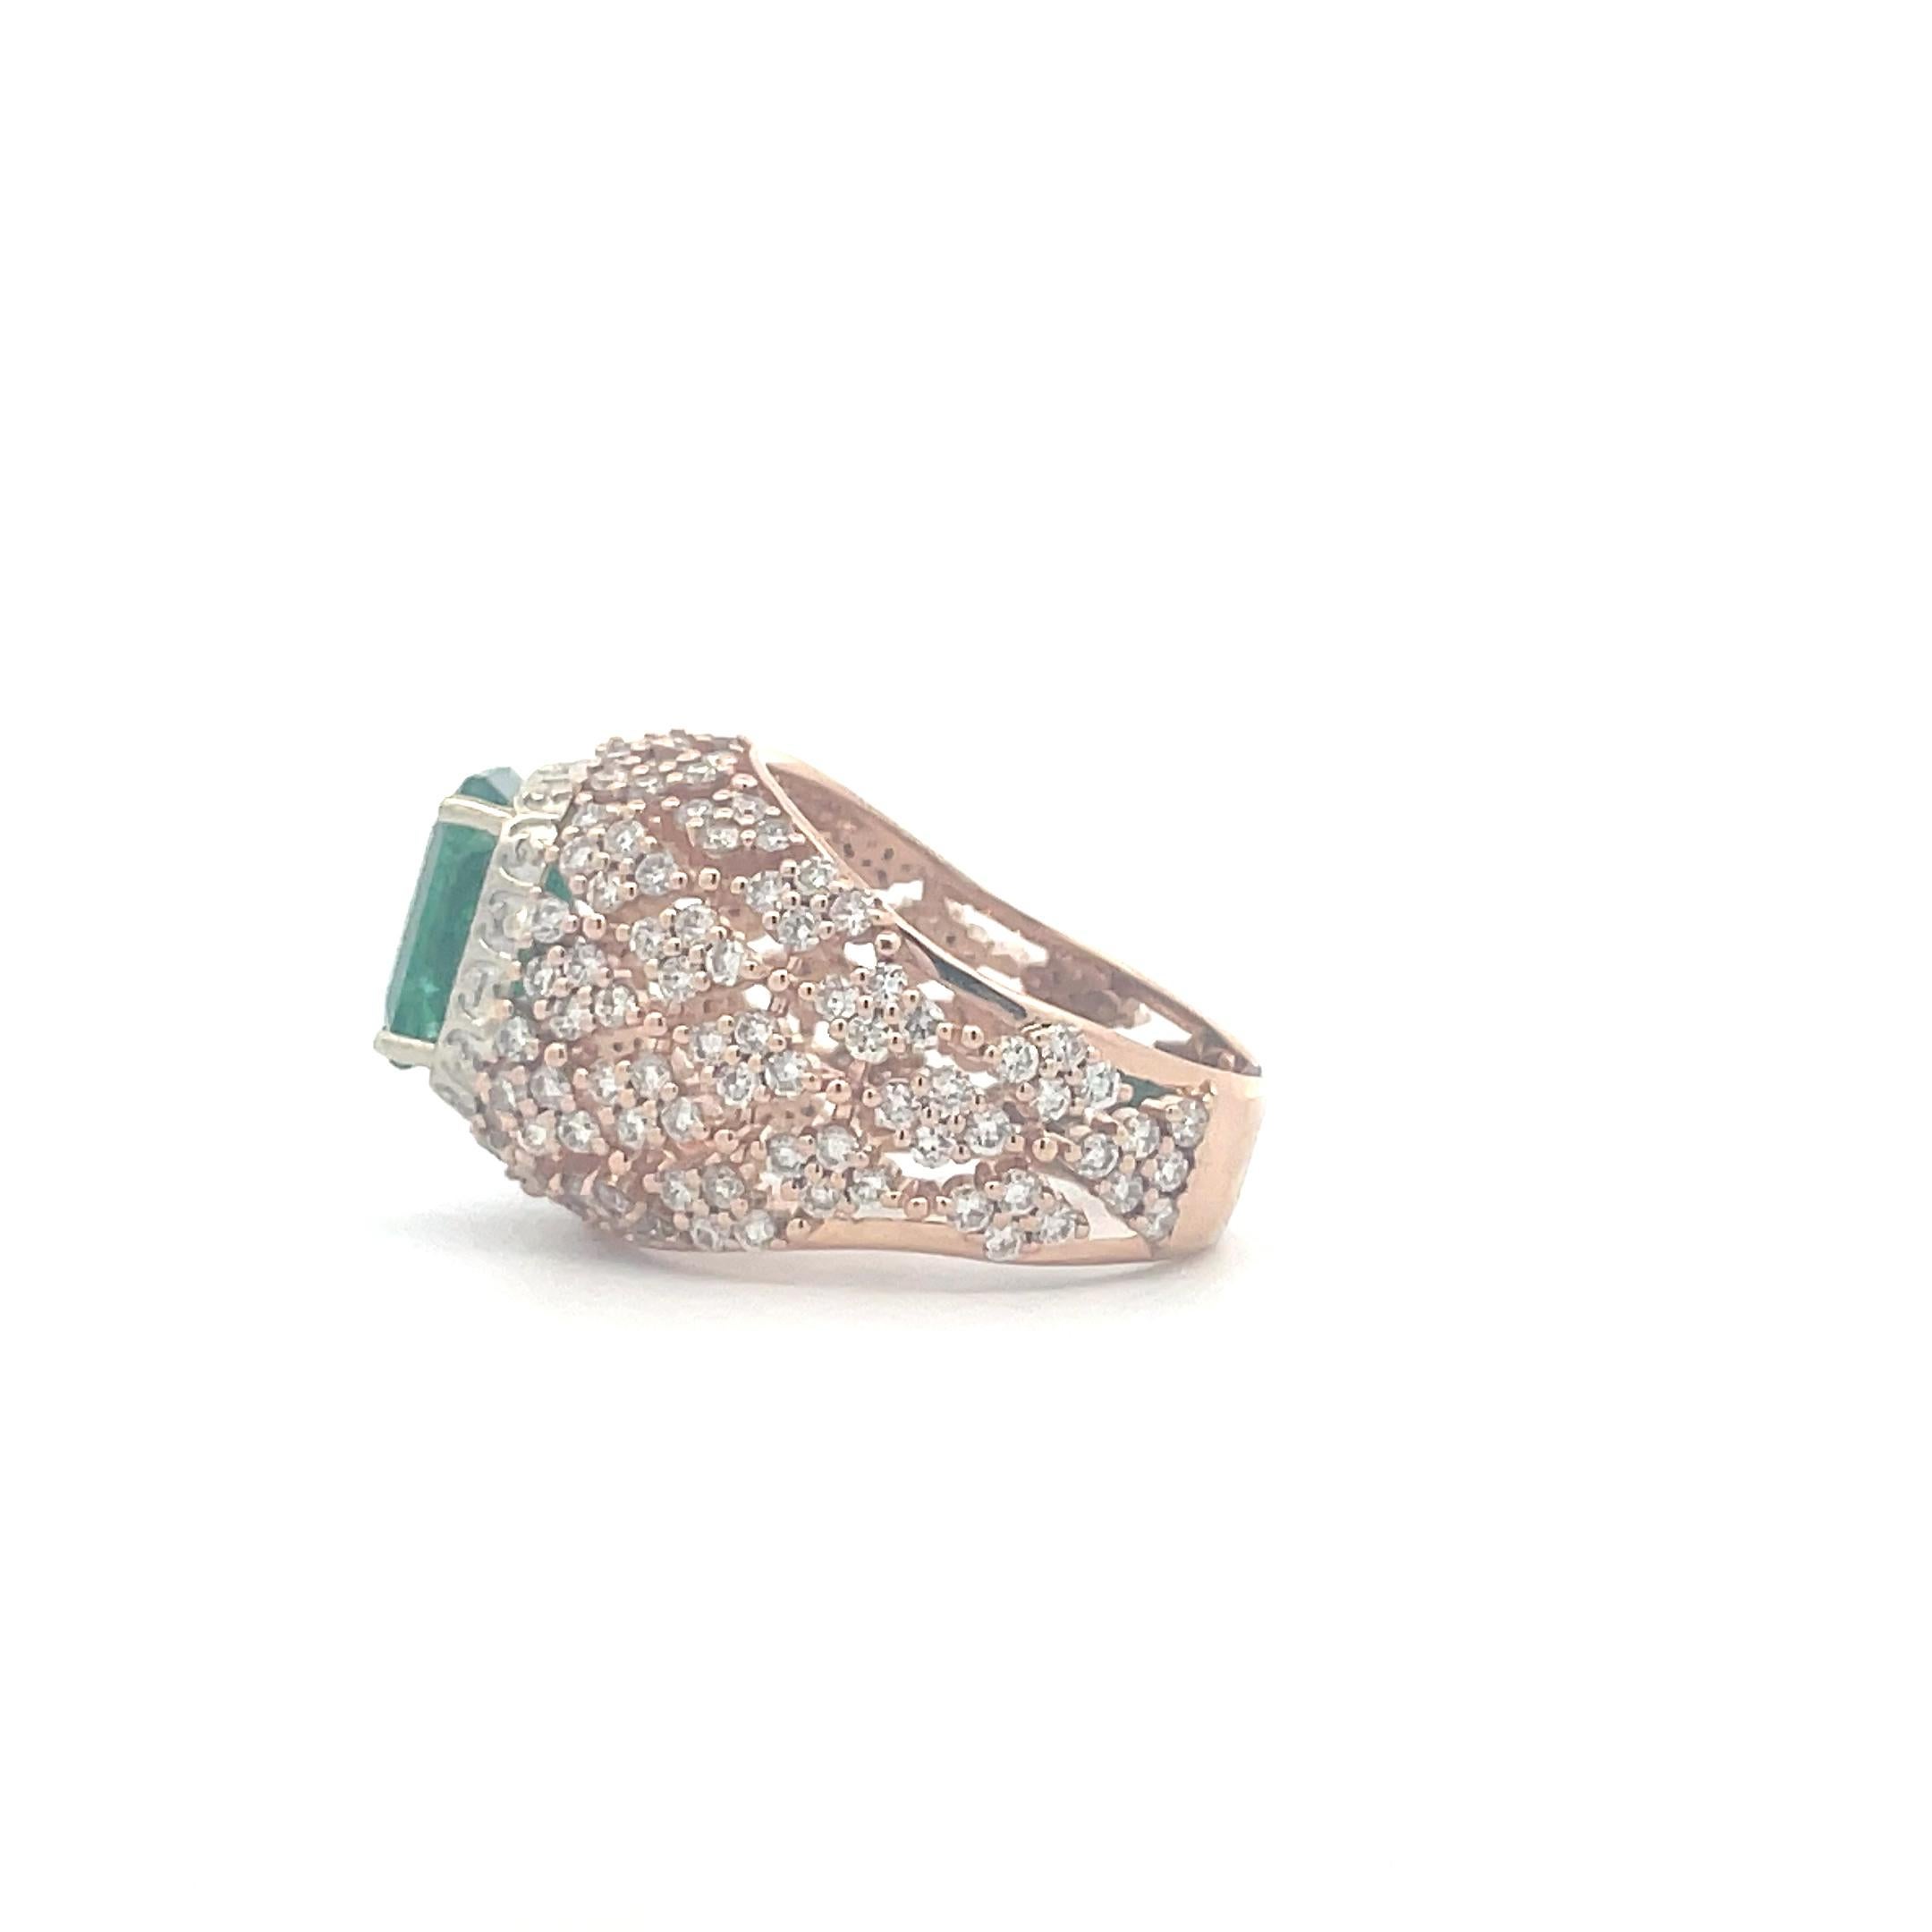 Exquisite and breathtaking, our 3.18 CT Emerald, Diamond Cluster, Hollow Cocktail Statement Ring is a unique design handcrafted by professional artisans. Crafted in 14k yellow gold and rose gold, this statement ring features a beautiful emerald